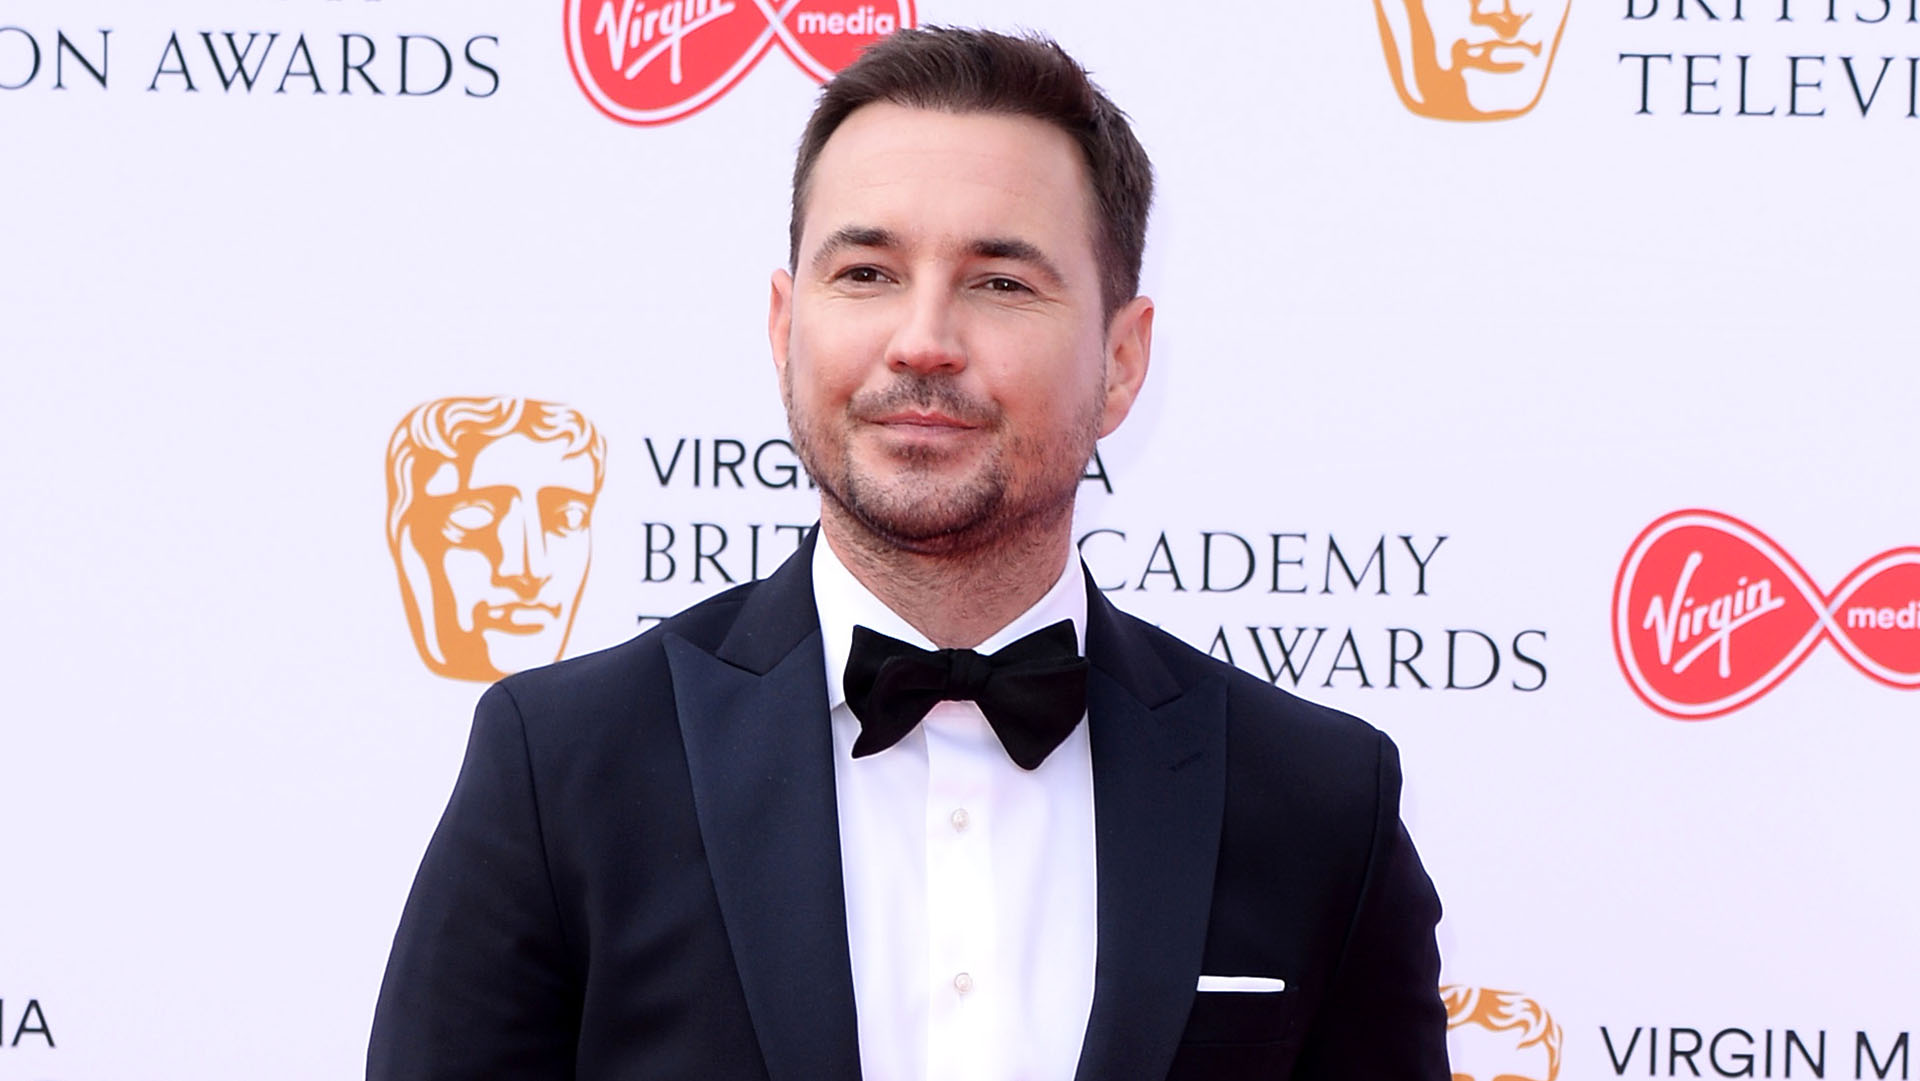 WATCH: Martin Compston Stars in First Look Trailer for ‘The Rig’ 